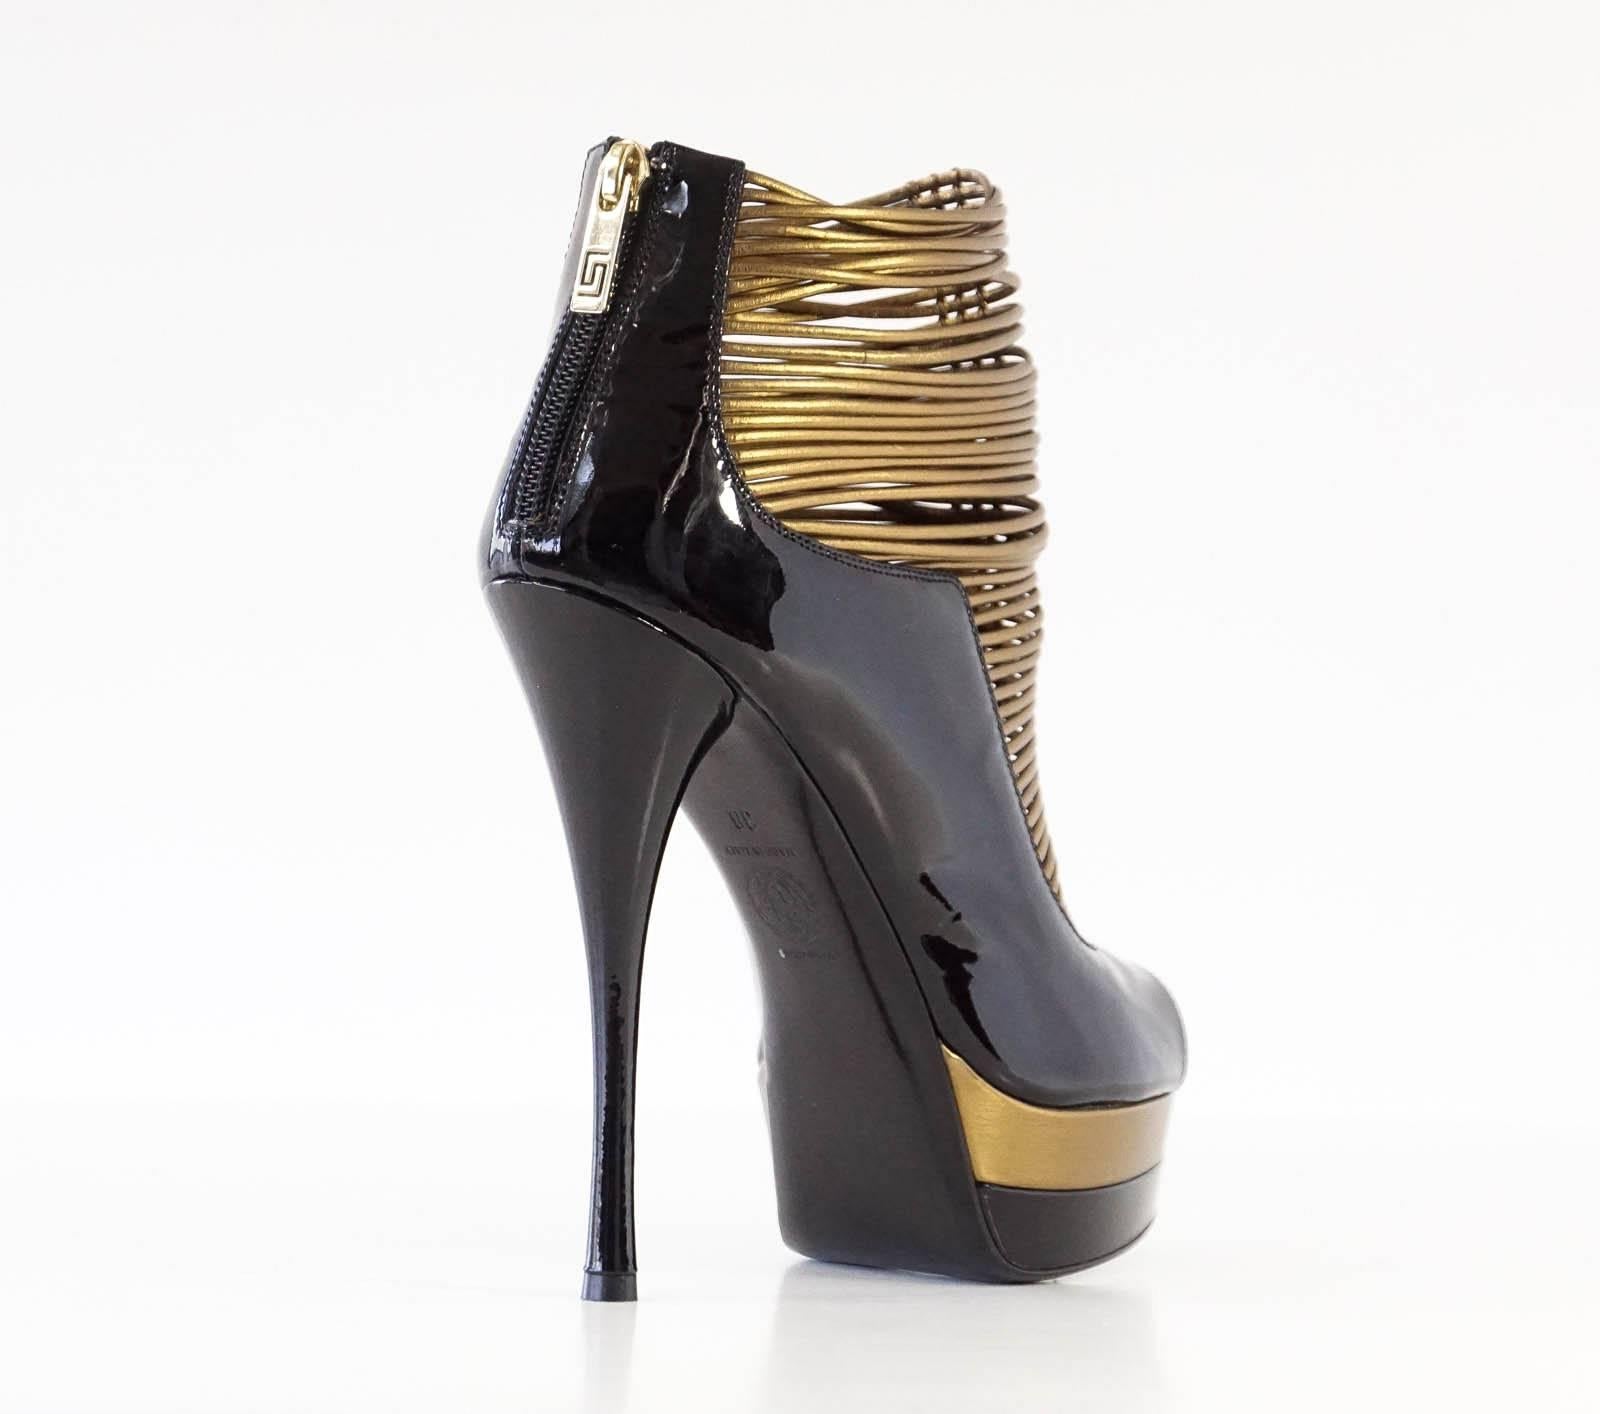 VERSACE Shoe Gold and Black Leather Platform Bootie 38 / 8  1